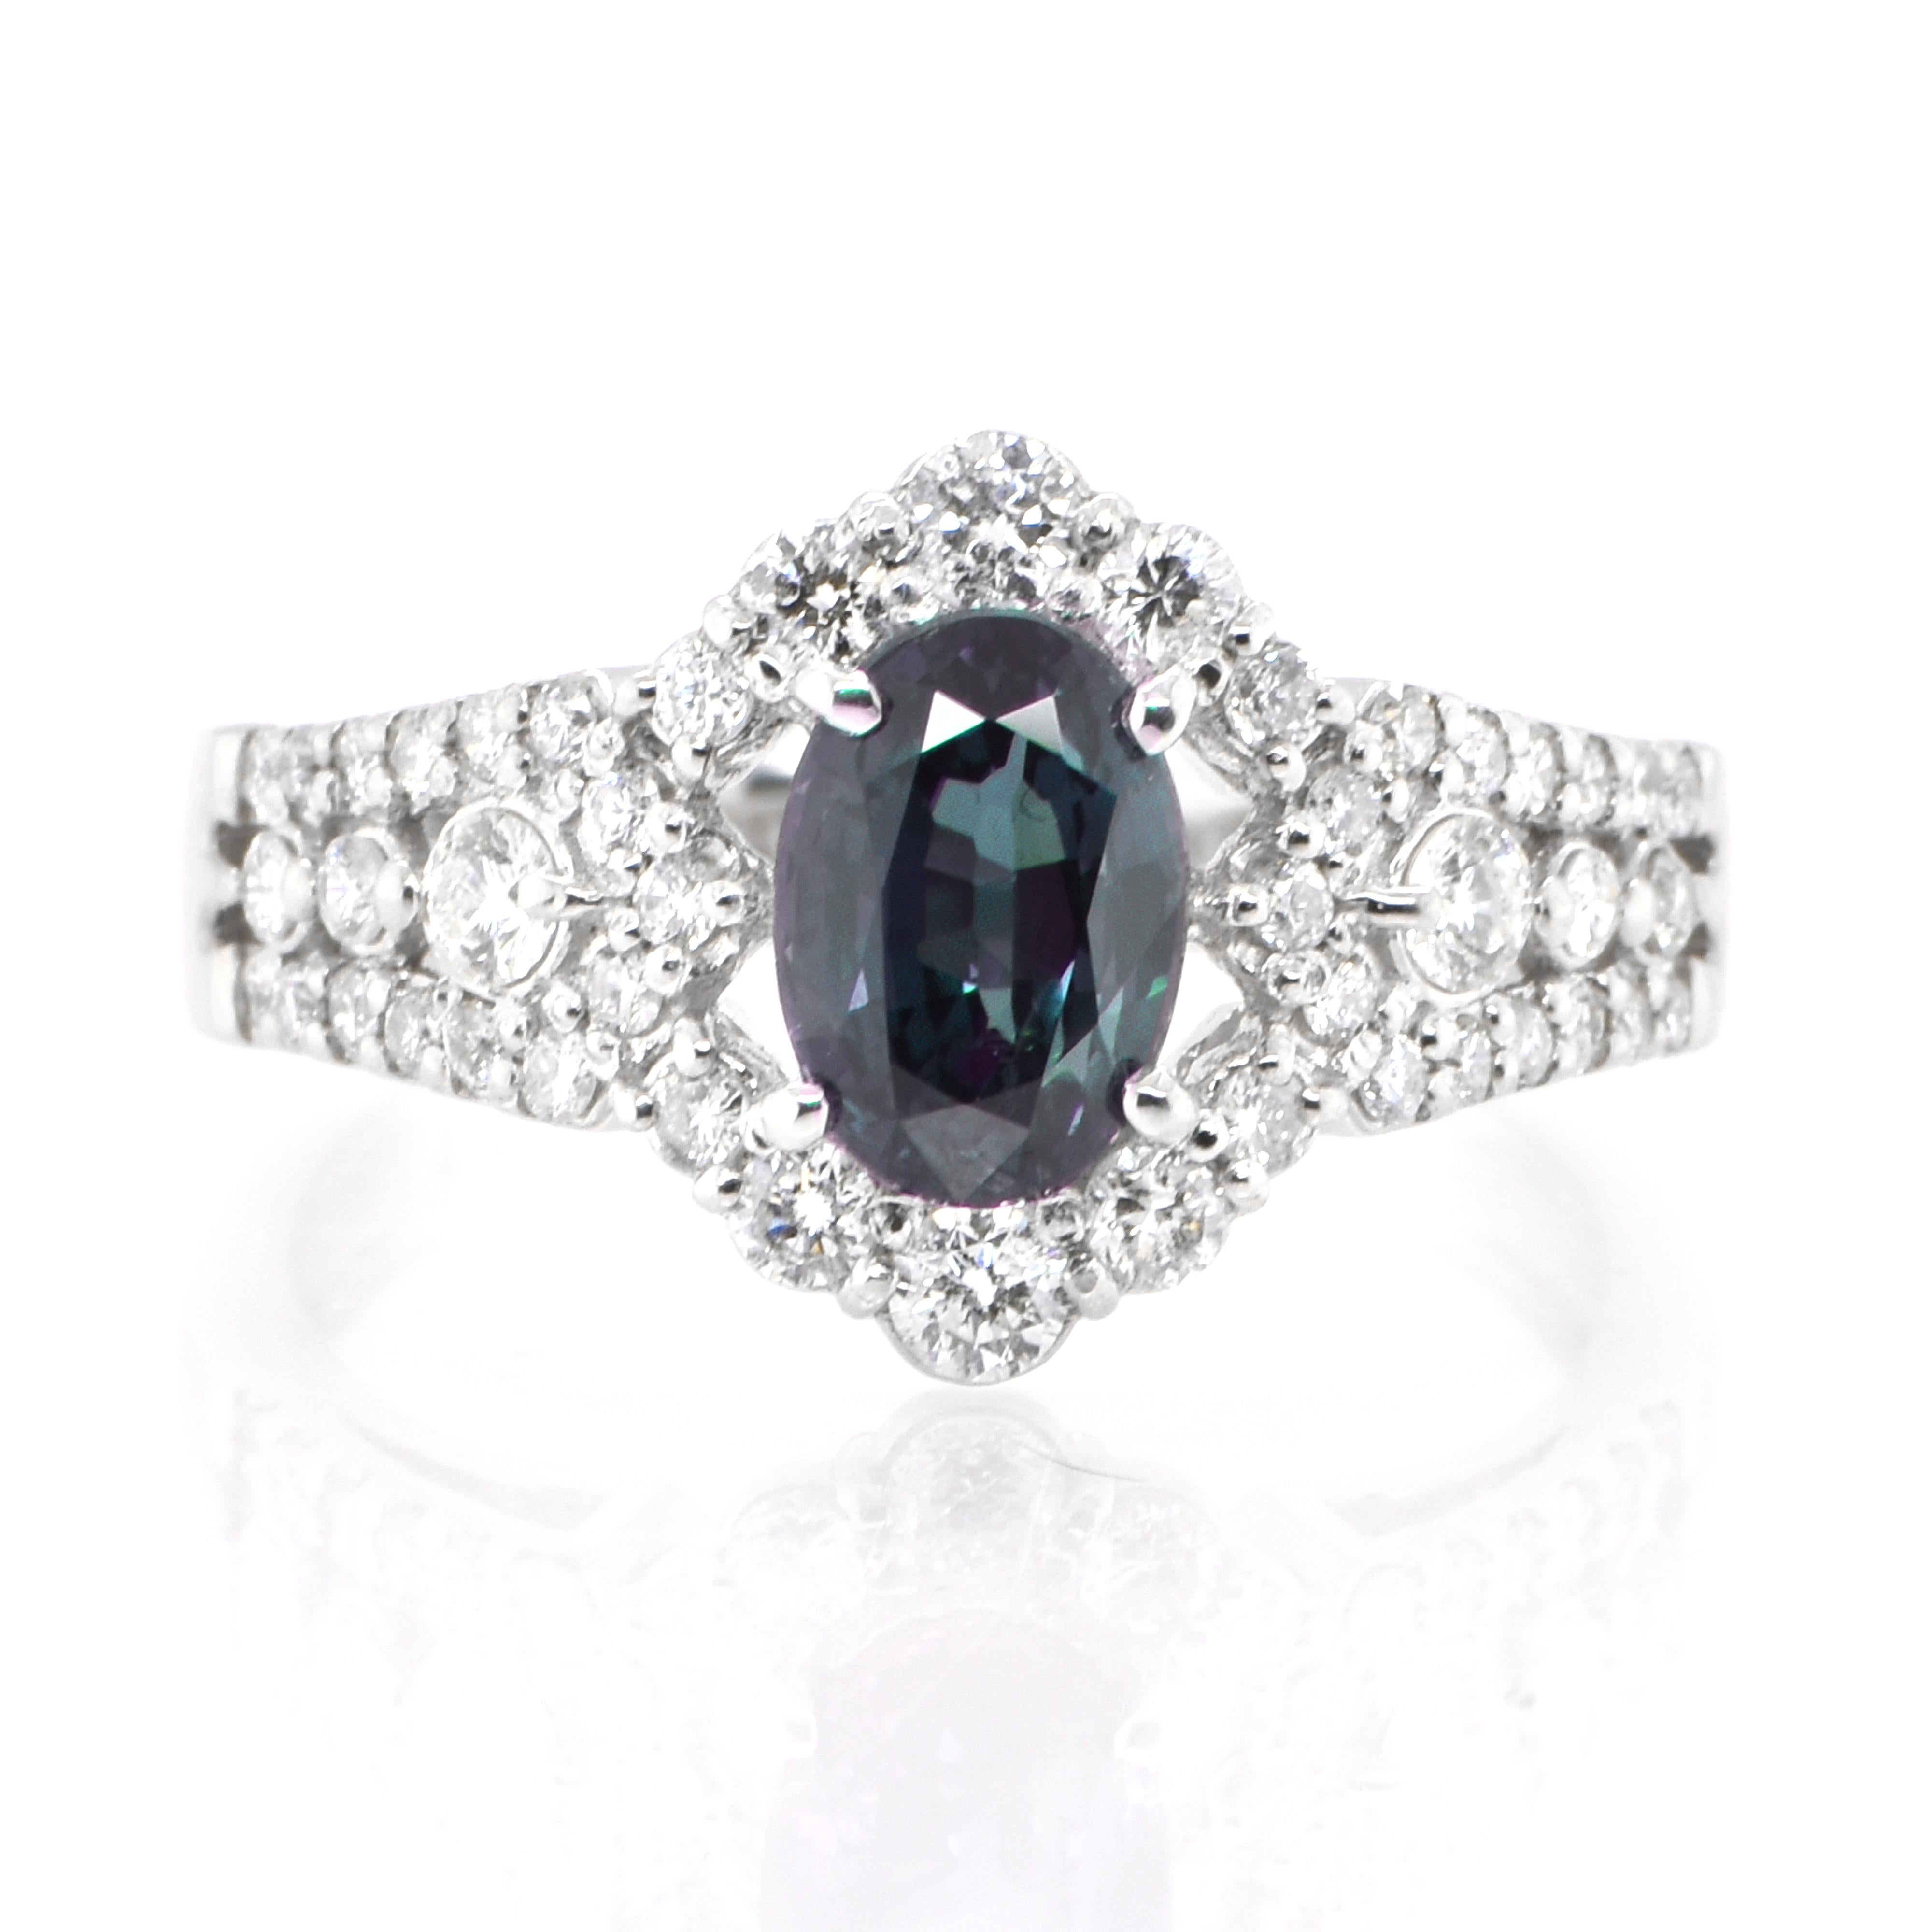 A gorgeous ring featuring a GIA Certified 1.38 Carat, Natural Brazilian Alexandrite and 0.53 Carats of Diamond Accents set in Platinum. Alexandrites produce a natural color-change phenomenon as they exhibit a Bluish Green Color under Fluorescent